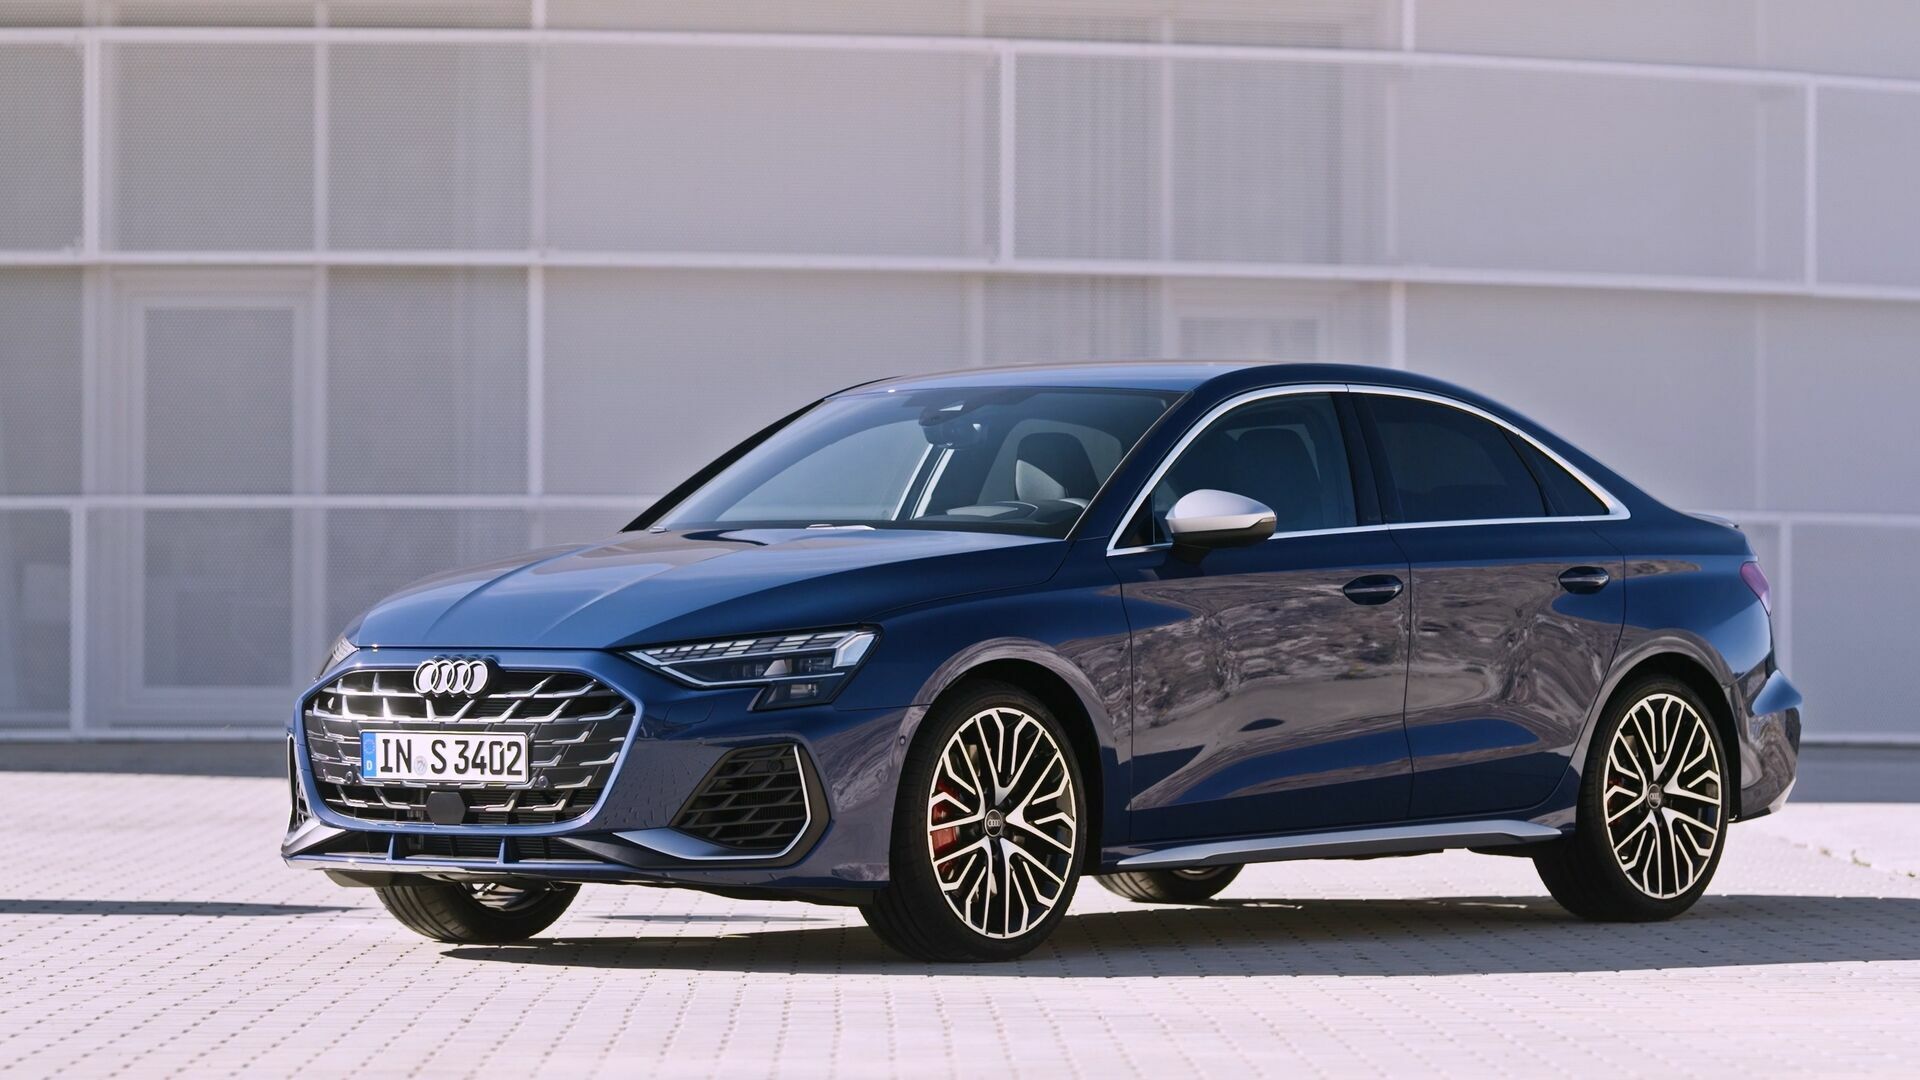 The technology of the Audi S3